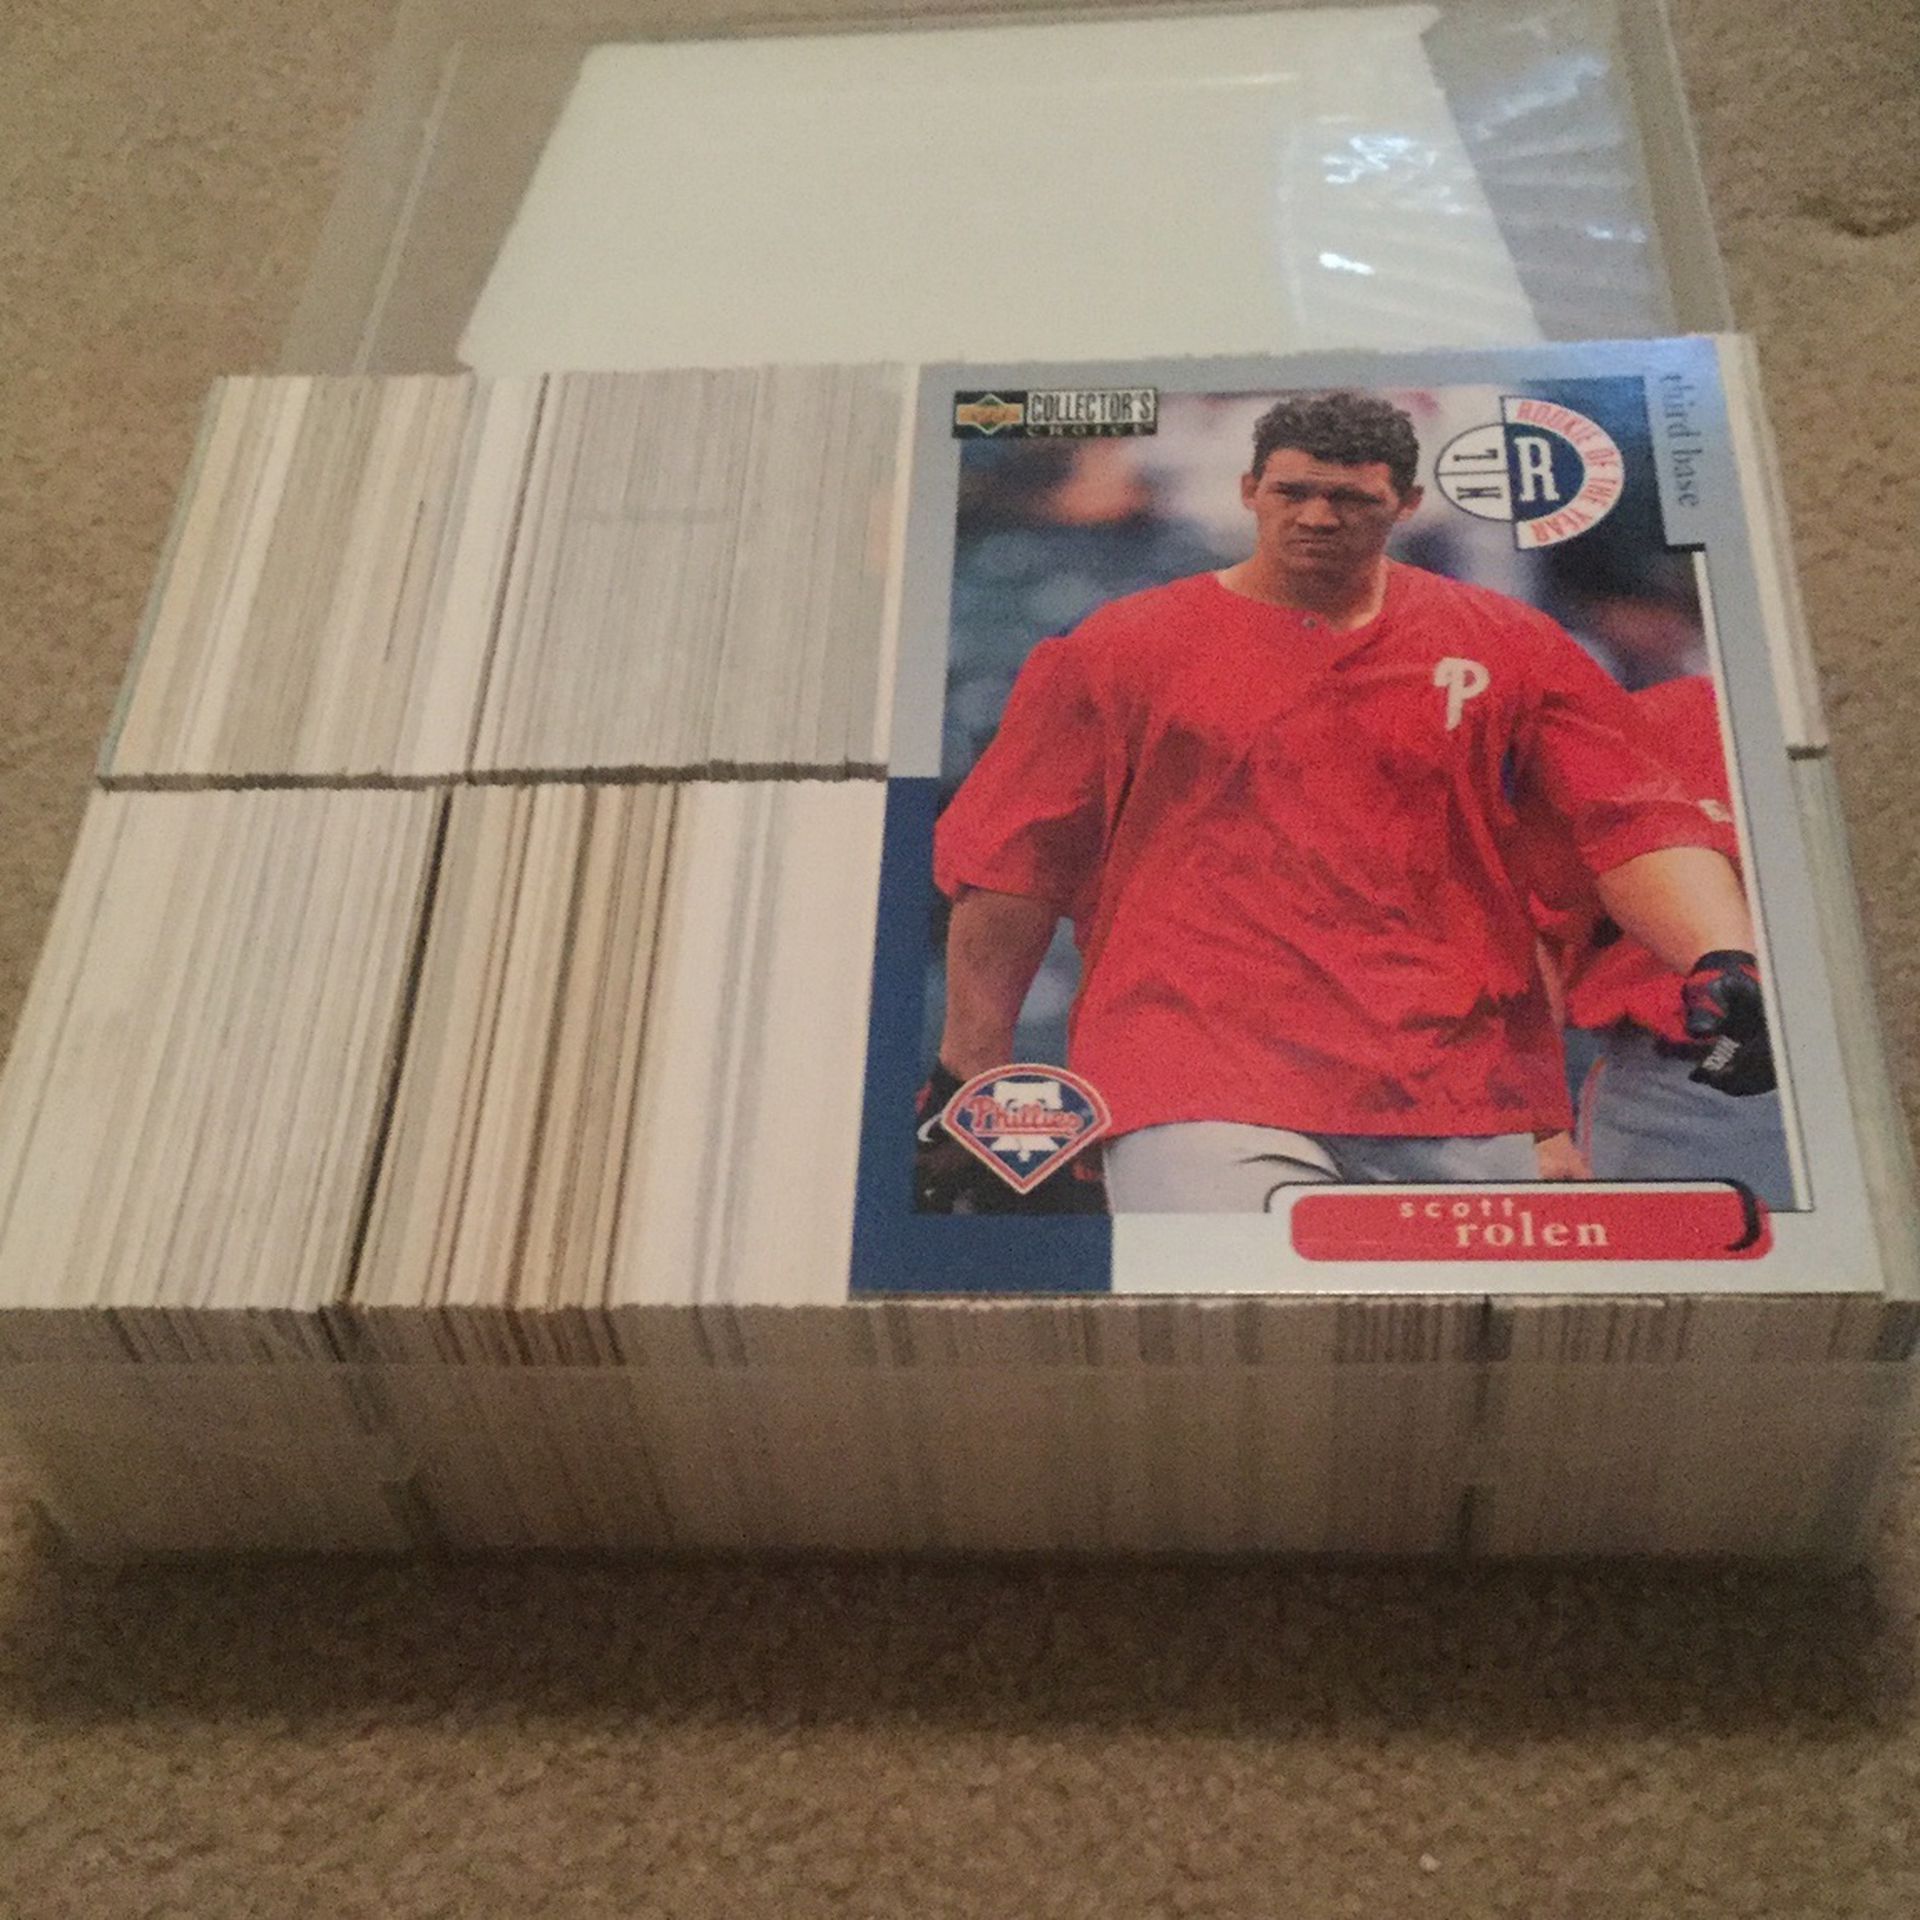 1000+ Great Condition Baseball Cards